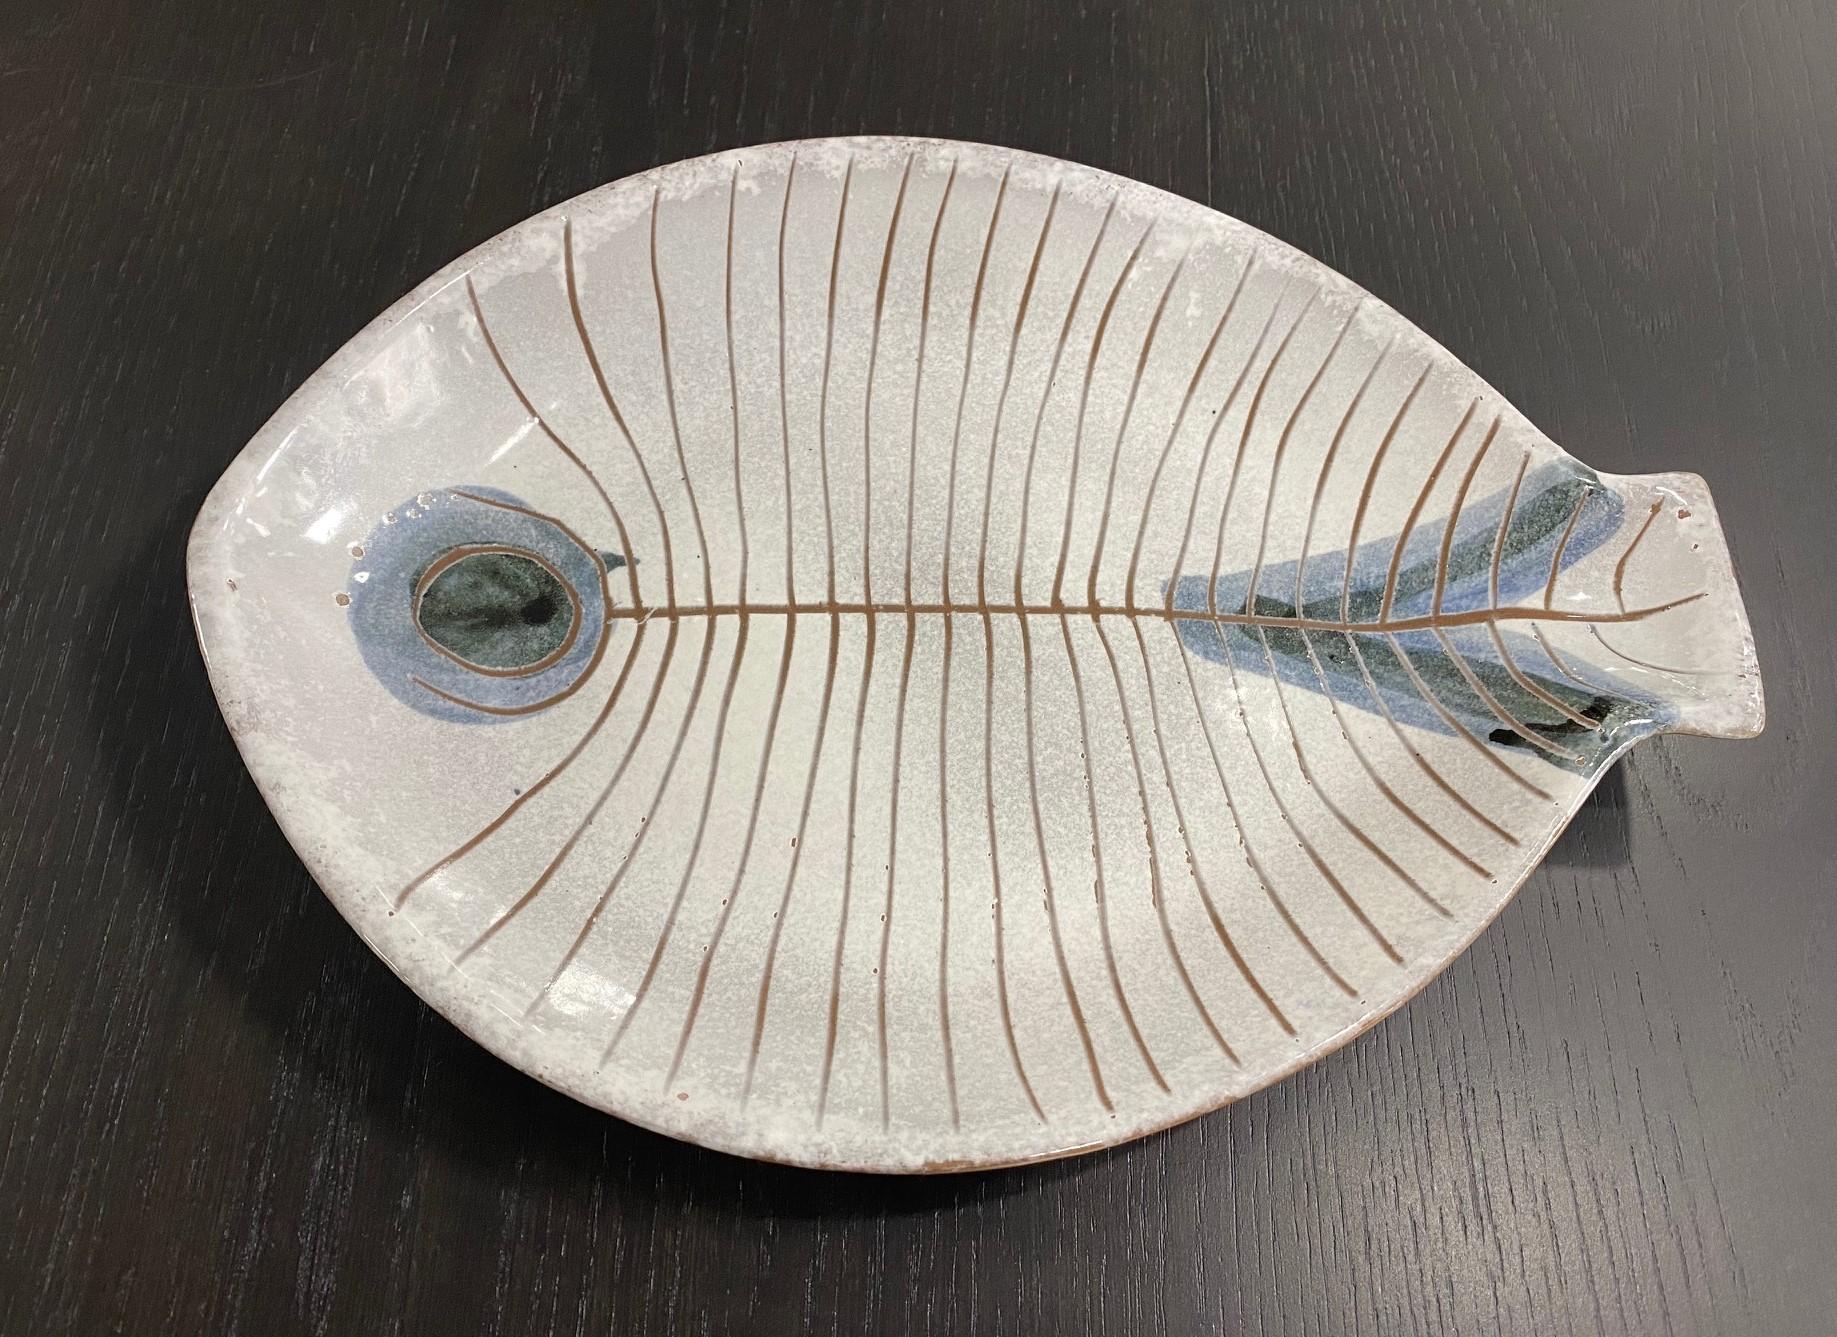 An iconic, beautifully designed, and decorated fish plate/ platter by famed Mid Century designers LaGardo Tackett (the primary founder of “Architectural Pottery,”) and Kenji Fujita and features their very distinctive glazing technique. 

This